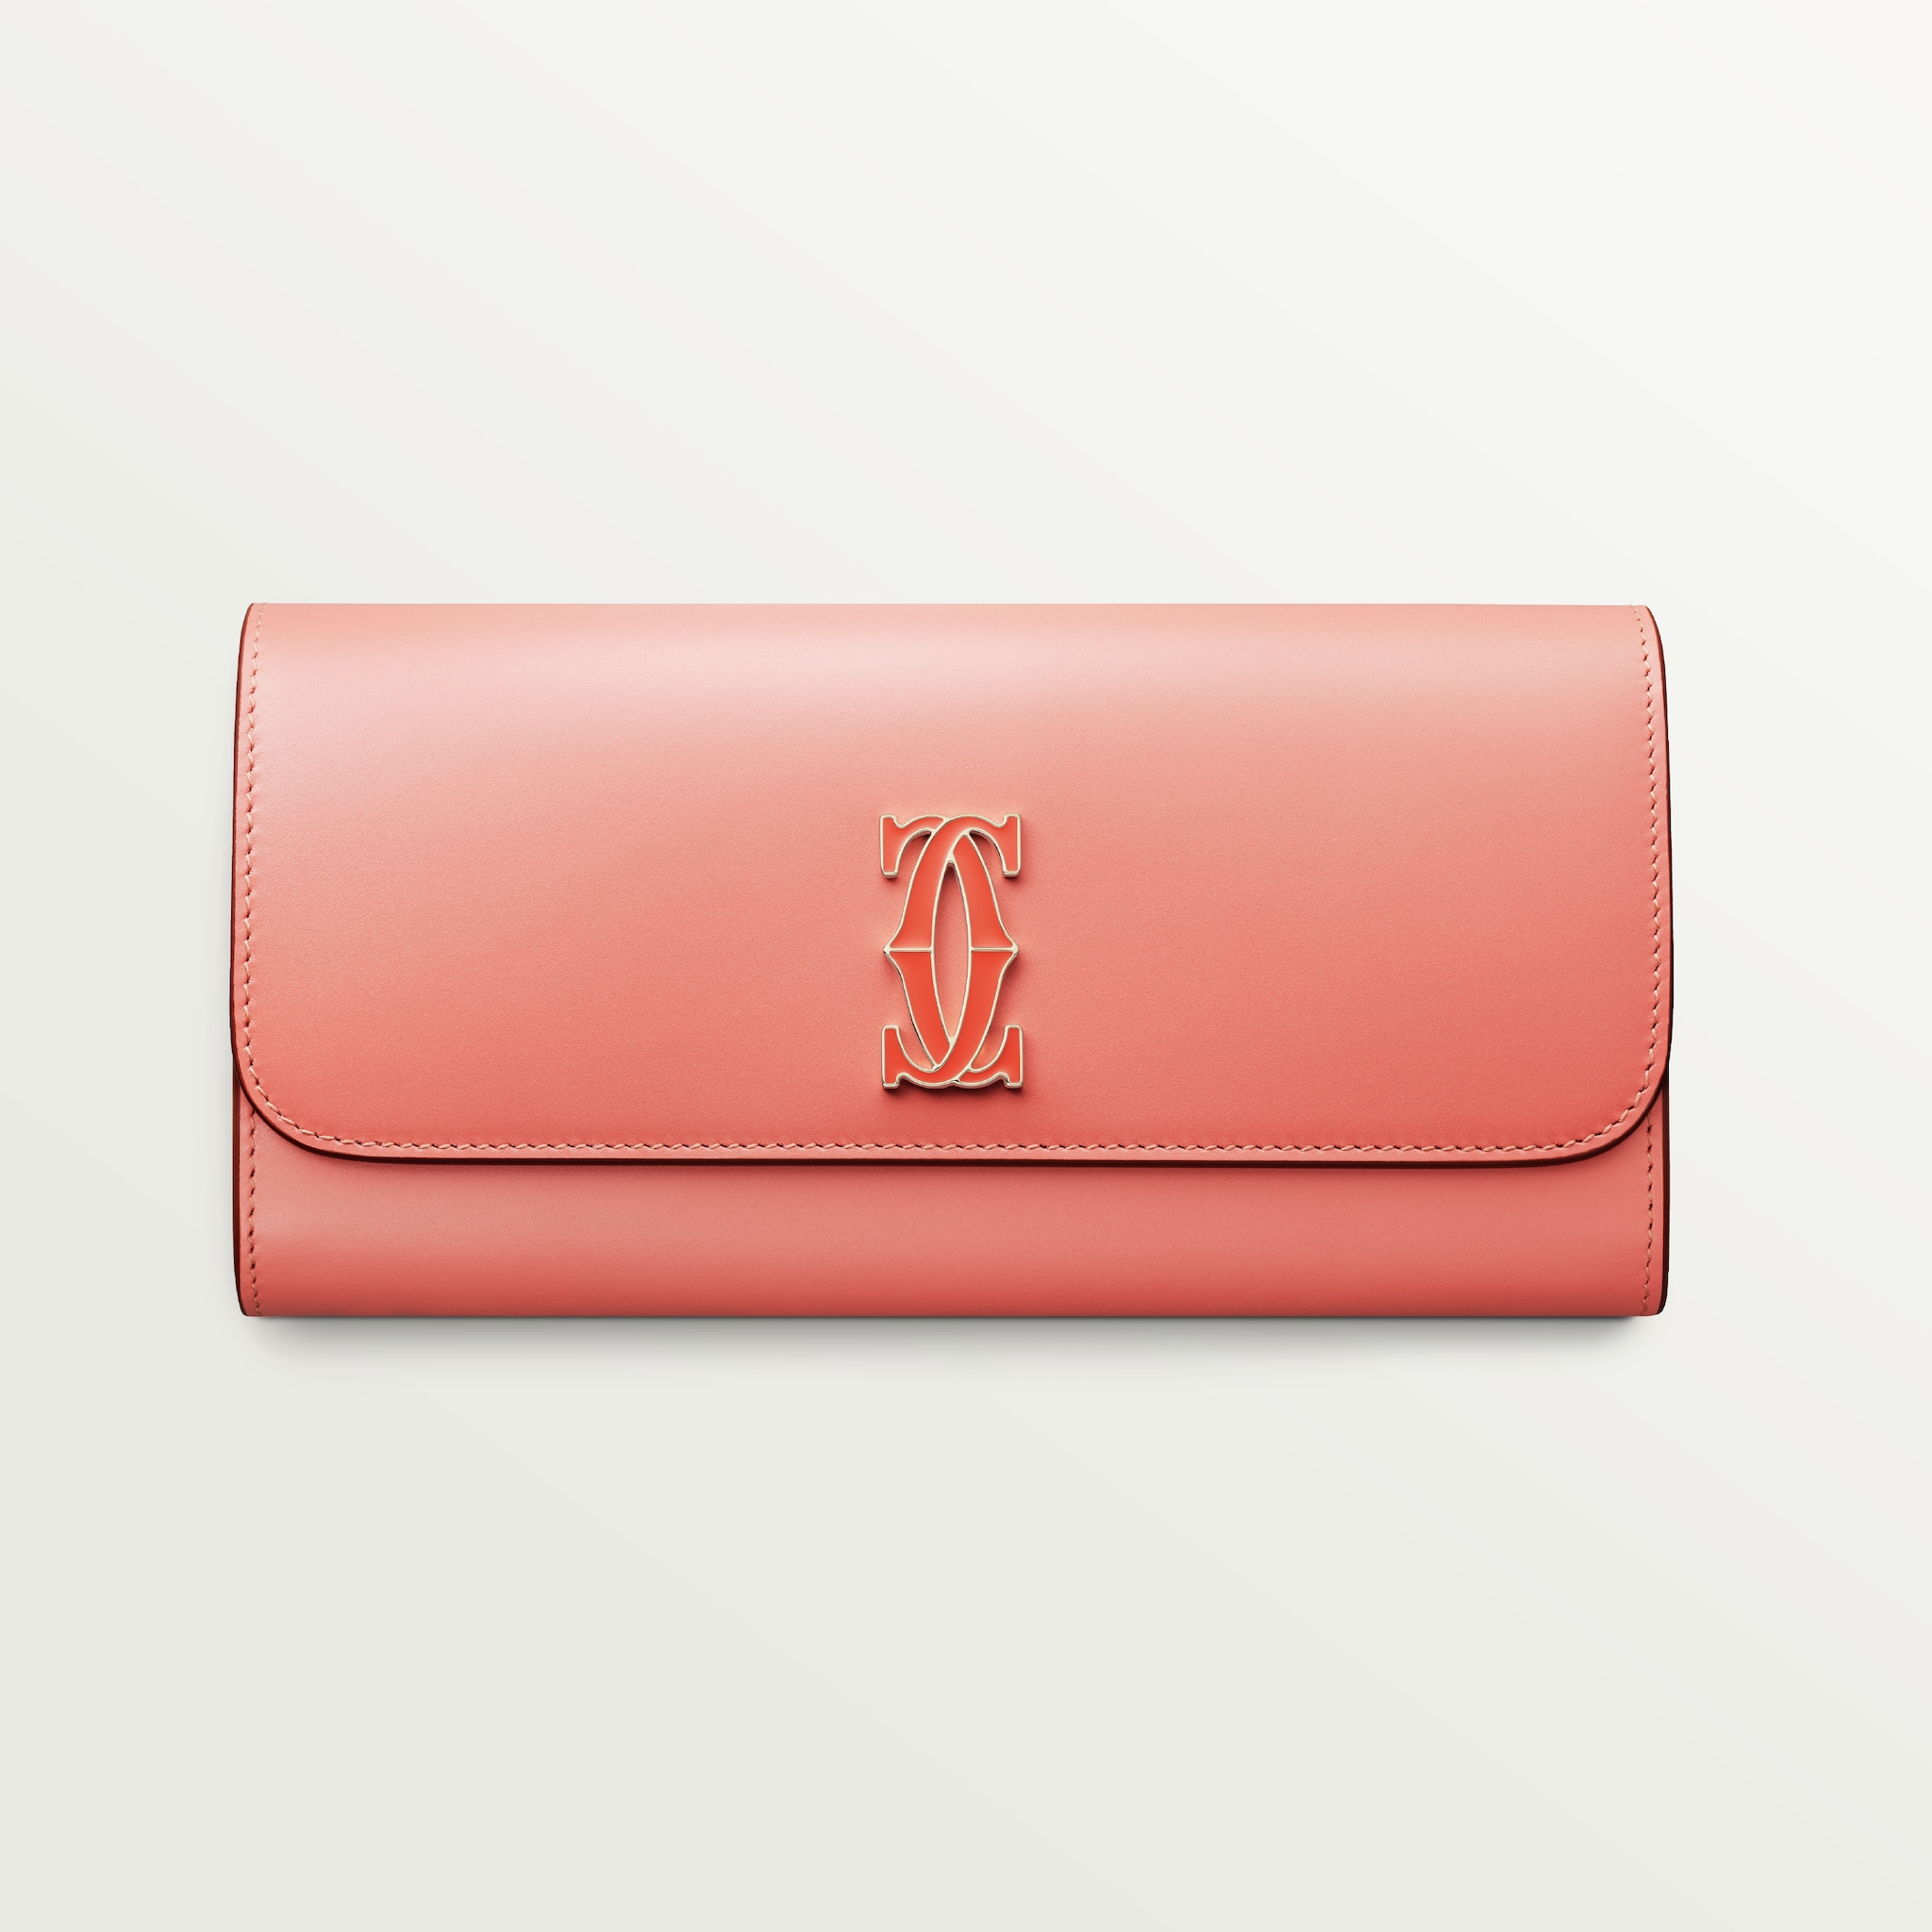 C de Cartier Small Leather Goods, WalletTwo-tone coral/light coral calfskin, golden finish and coral/light coral enamel